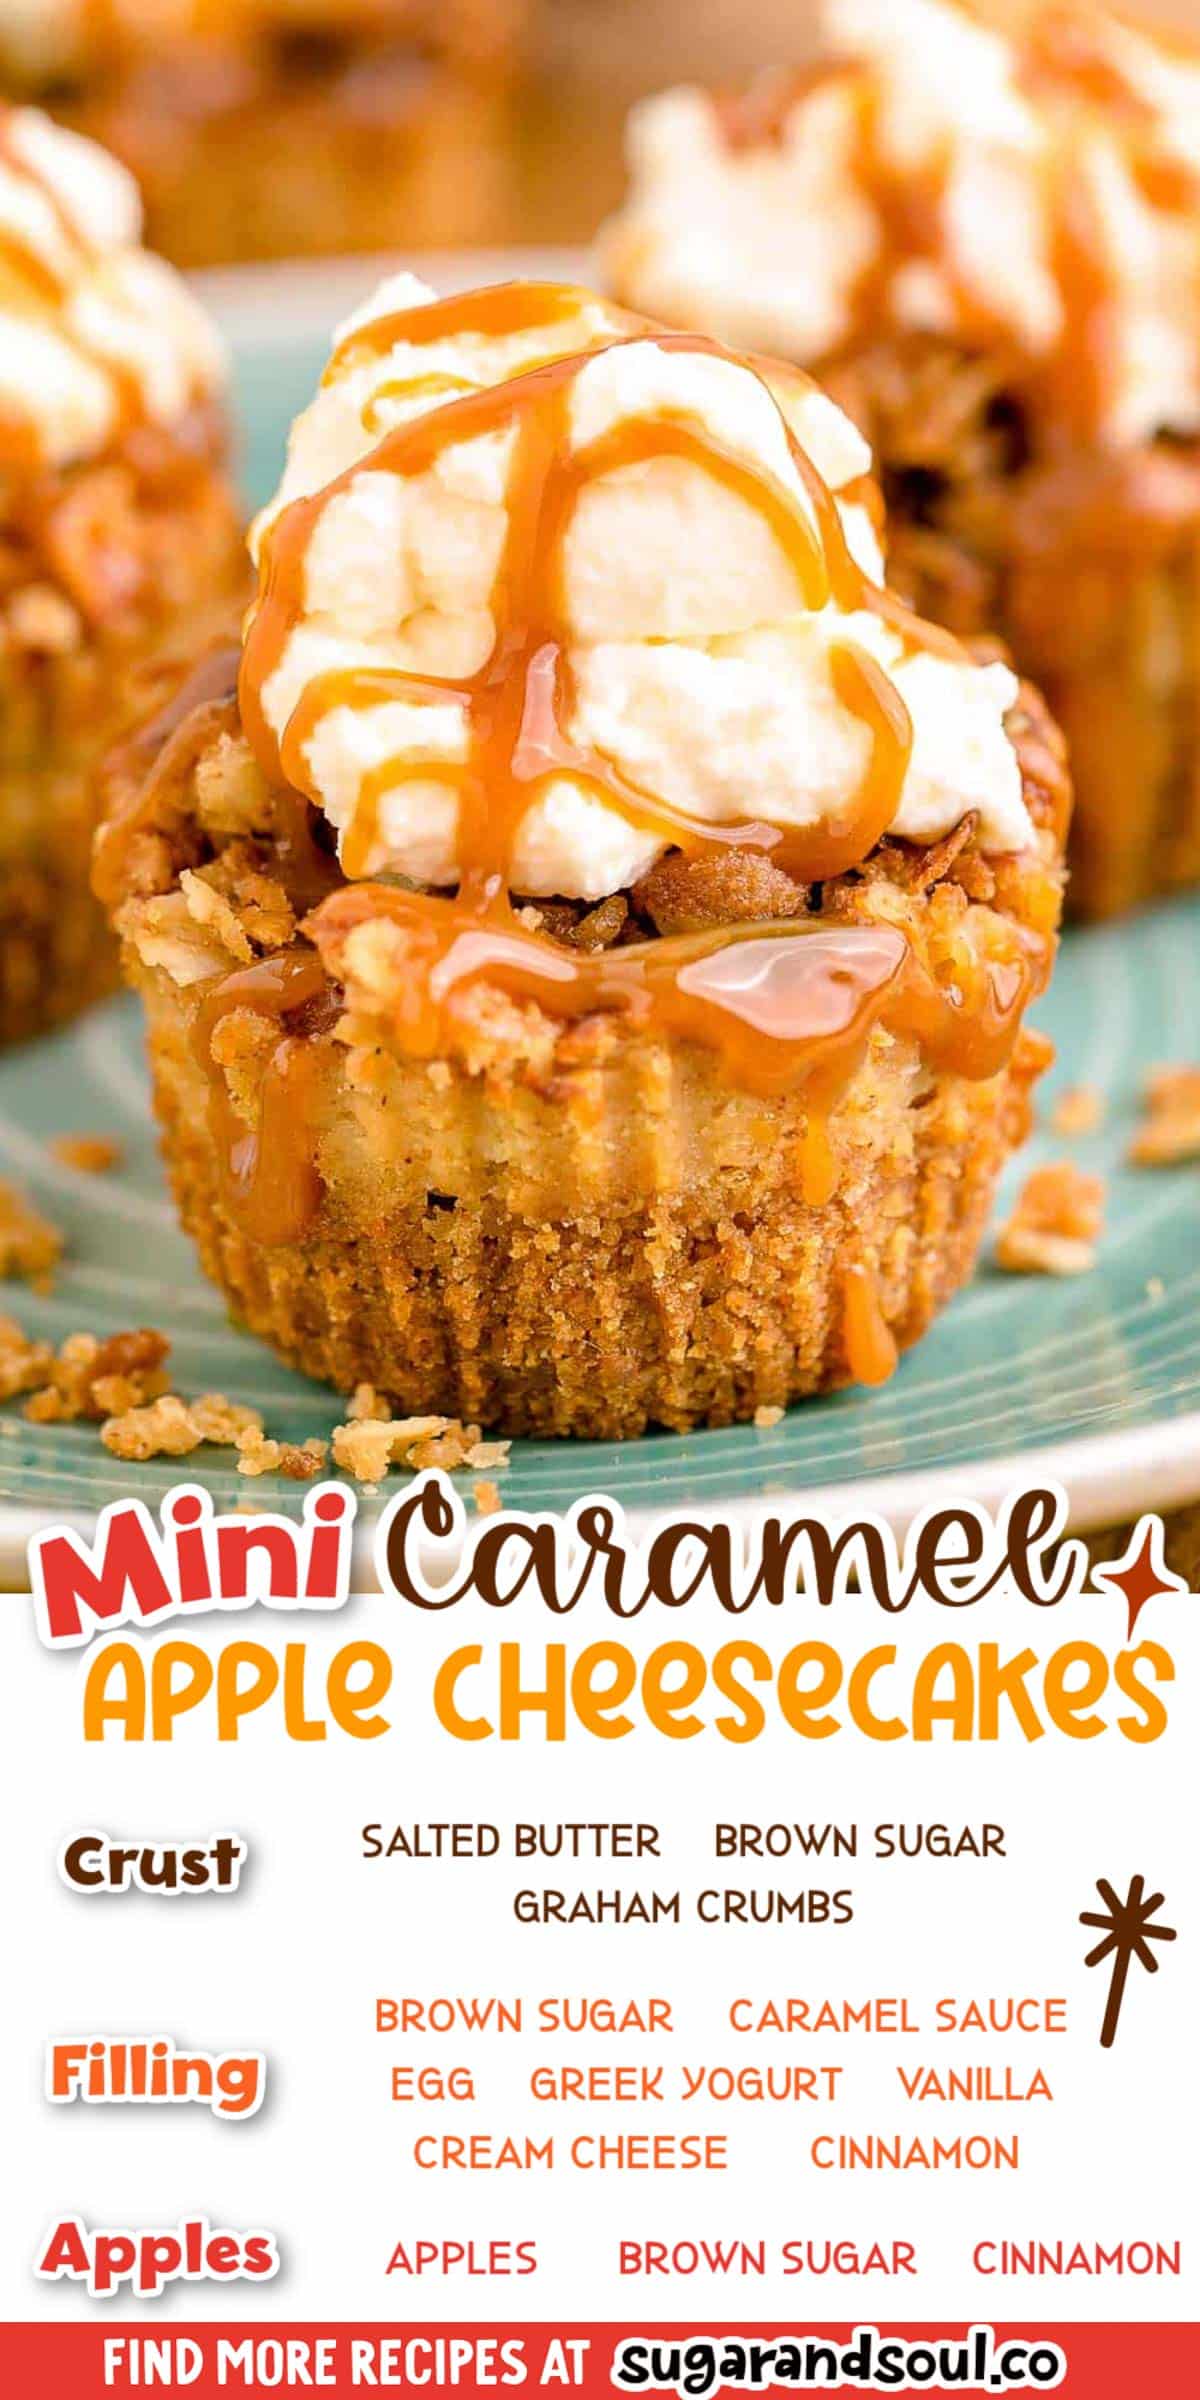 Mini Caramel Apple Cheesecakes have a creamy caramel cheesecake filling that's covered with tender spiced apples and a sweet oat topping! Prep this mouthwatering Fall dessert in only 30 minutes! via @sugarandsoulco